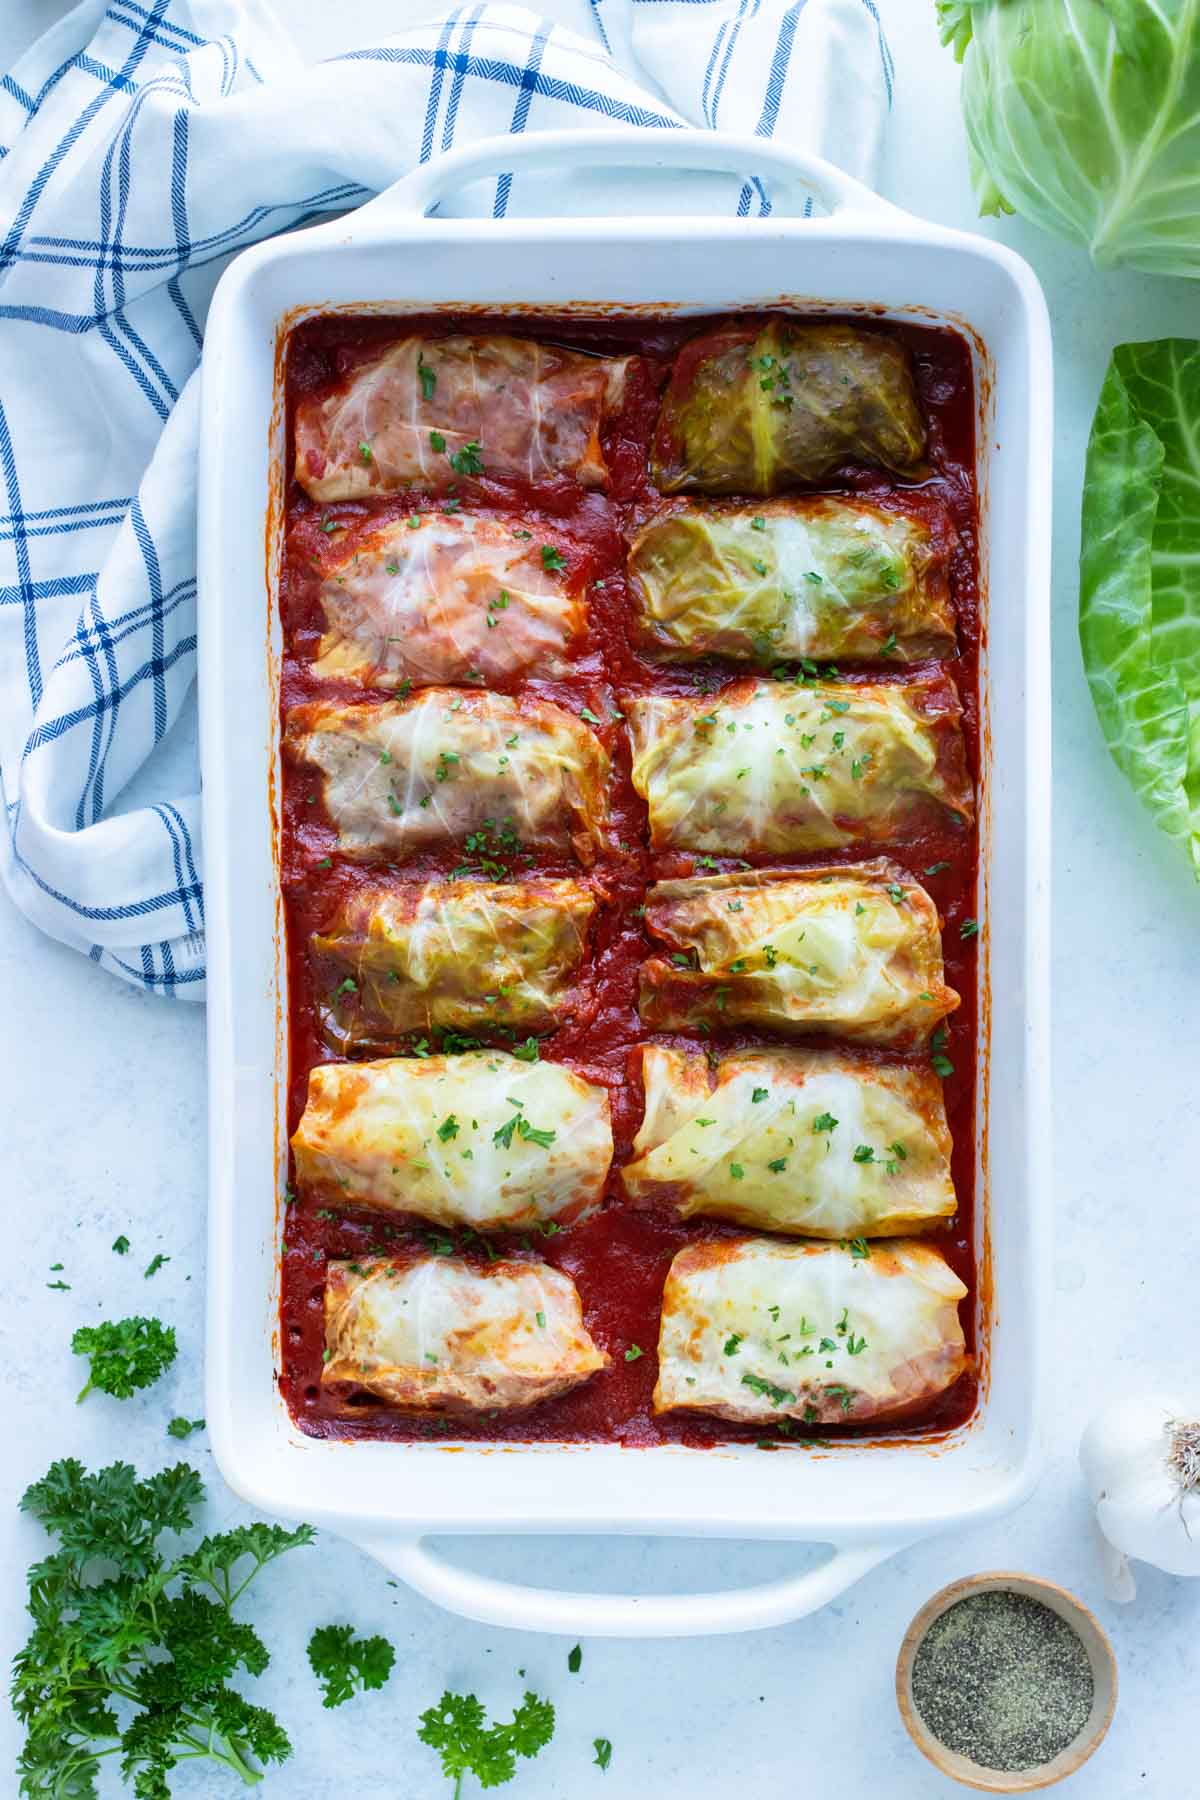 Cabbage Rolls are served in a 9x13 casserole dish.